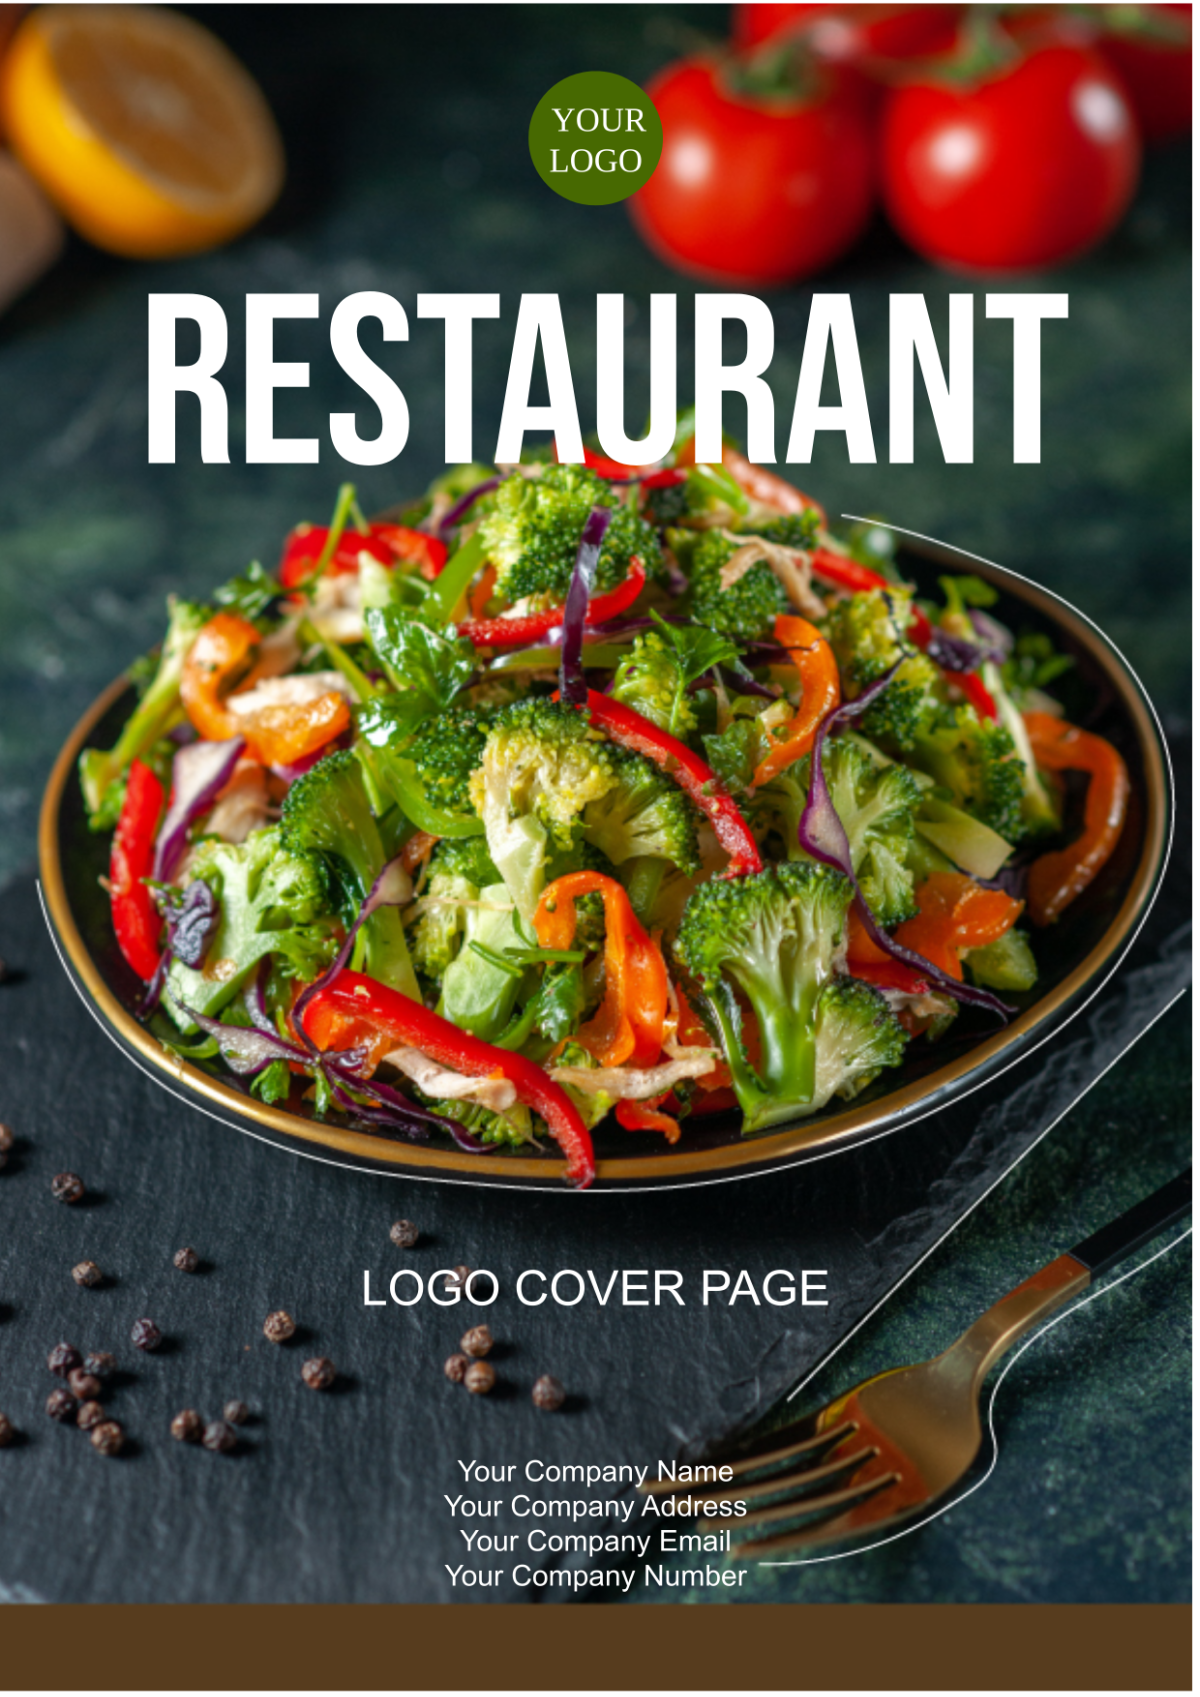 Restaurant Logo Cover Page